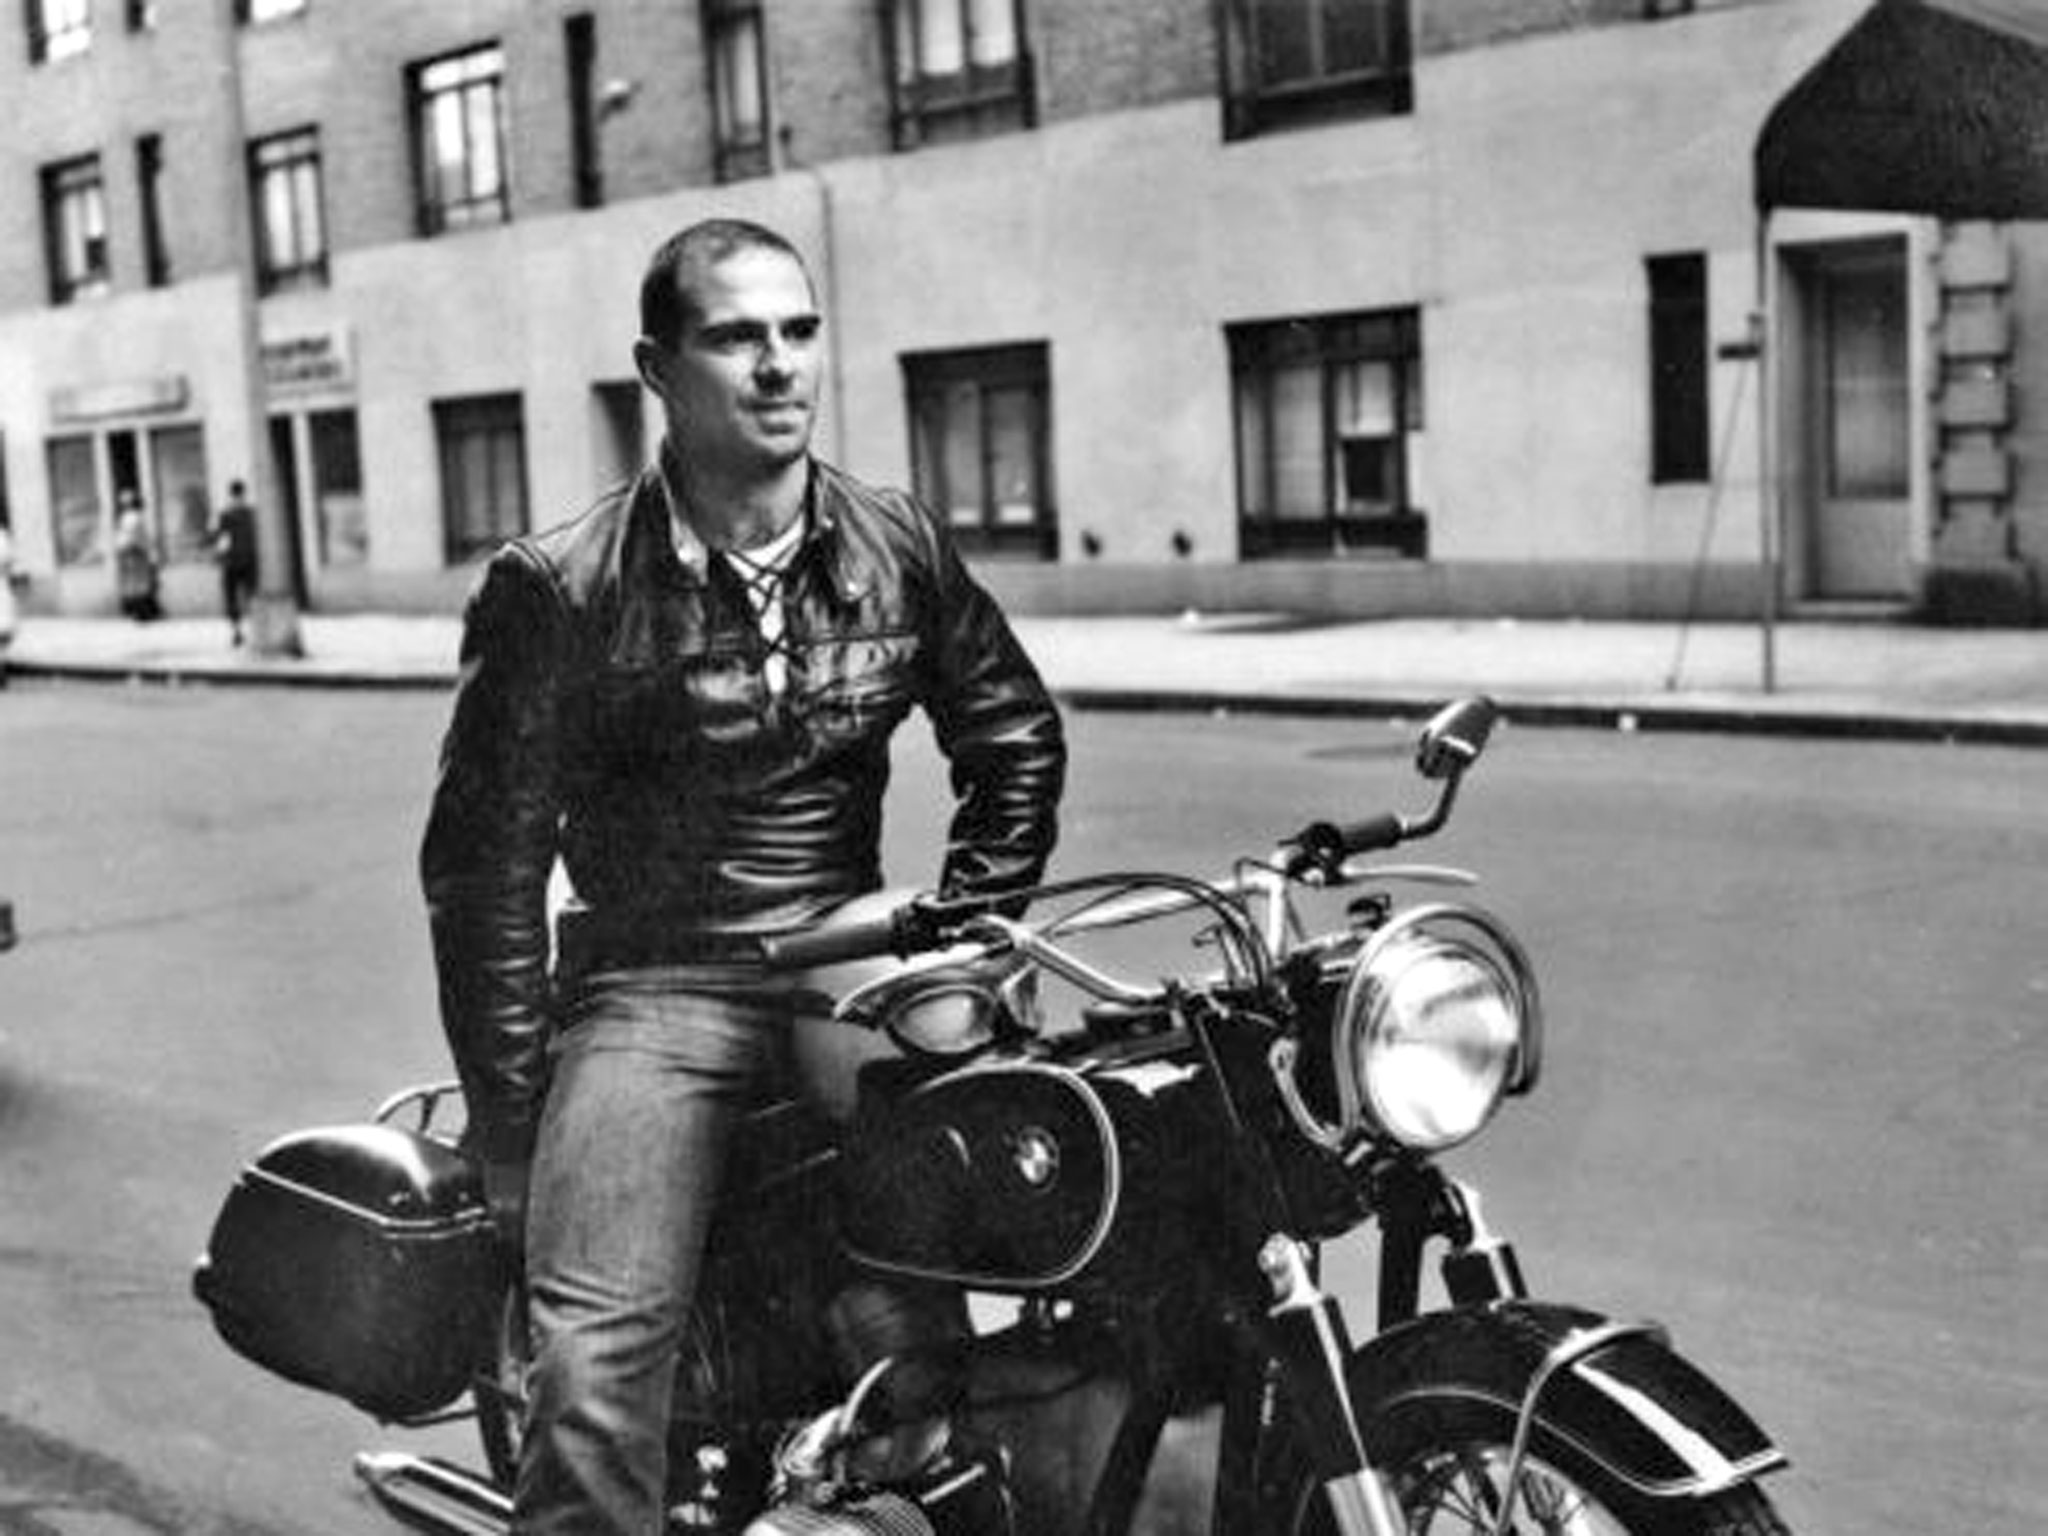 Morto lo scrittore omosessuale Oliver Sacks - Oliver Sacks 2 - Gay.it